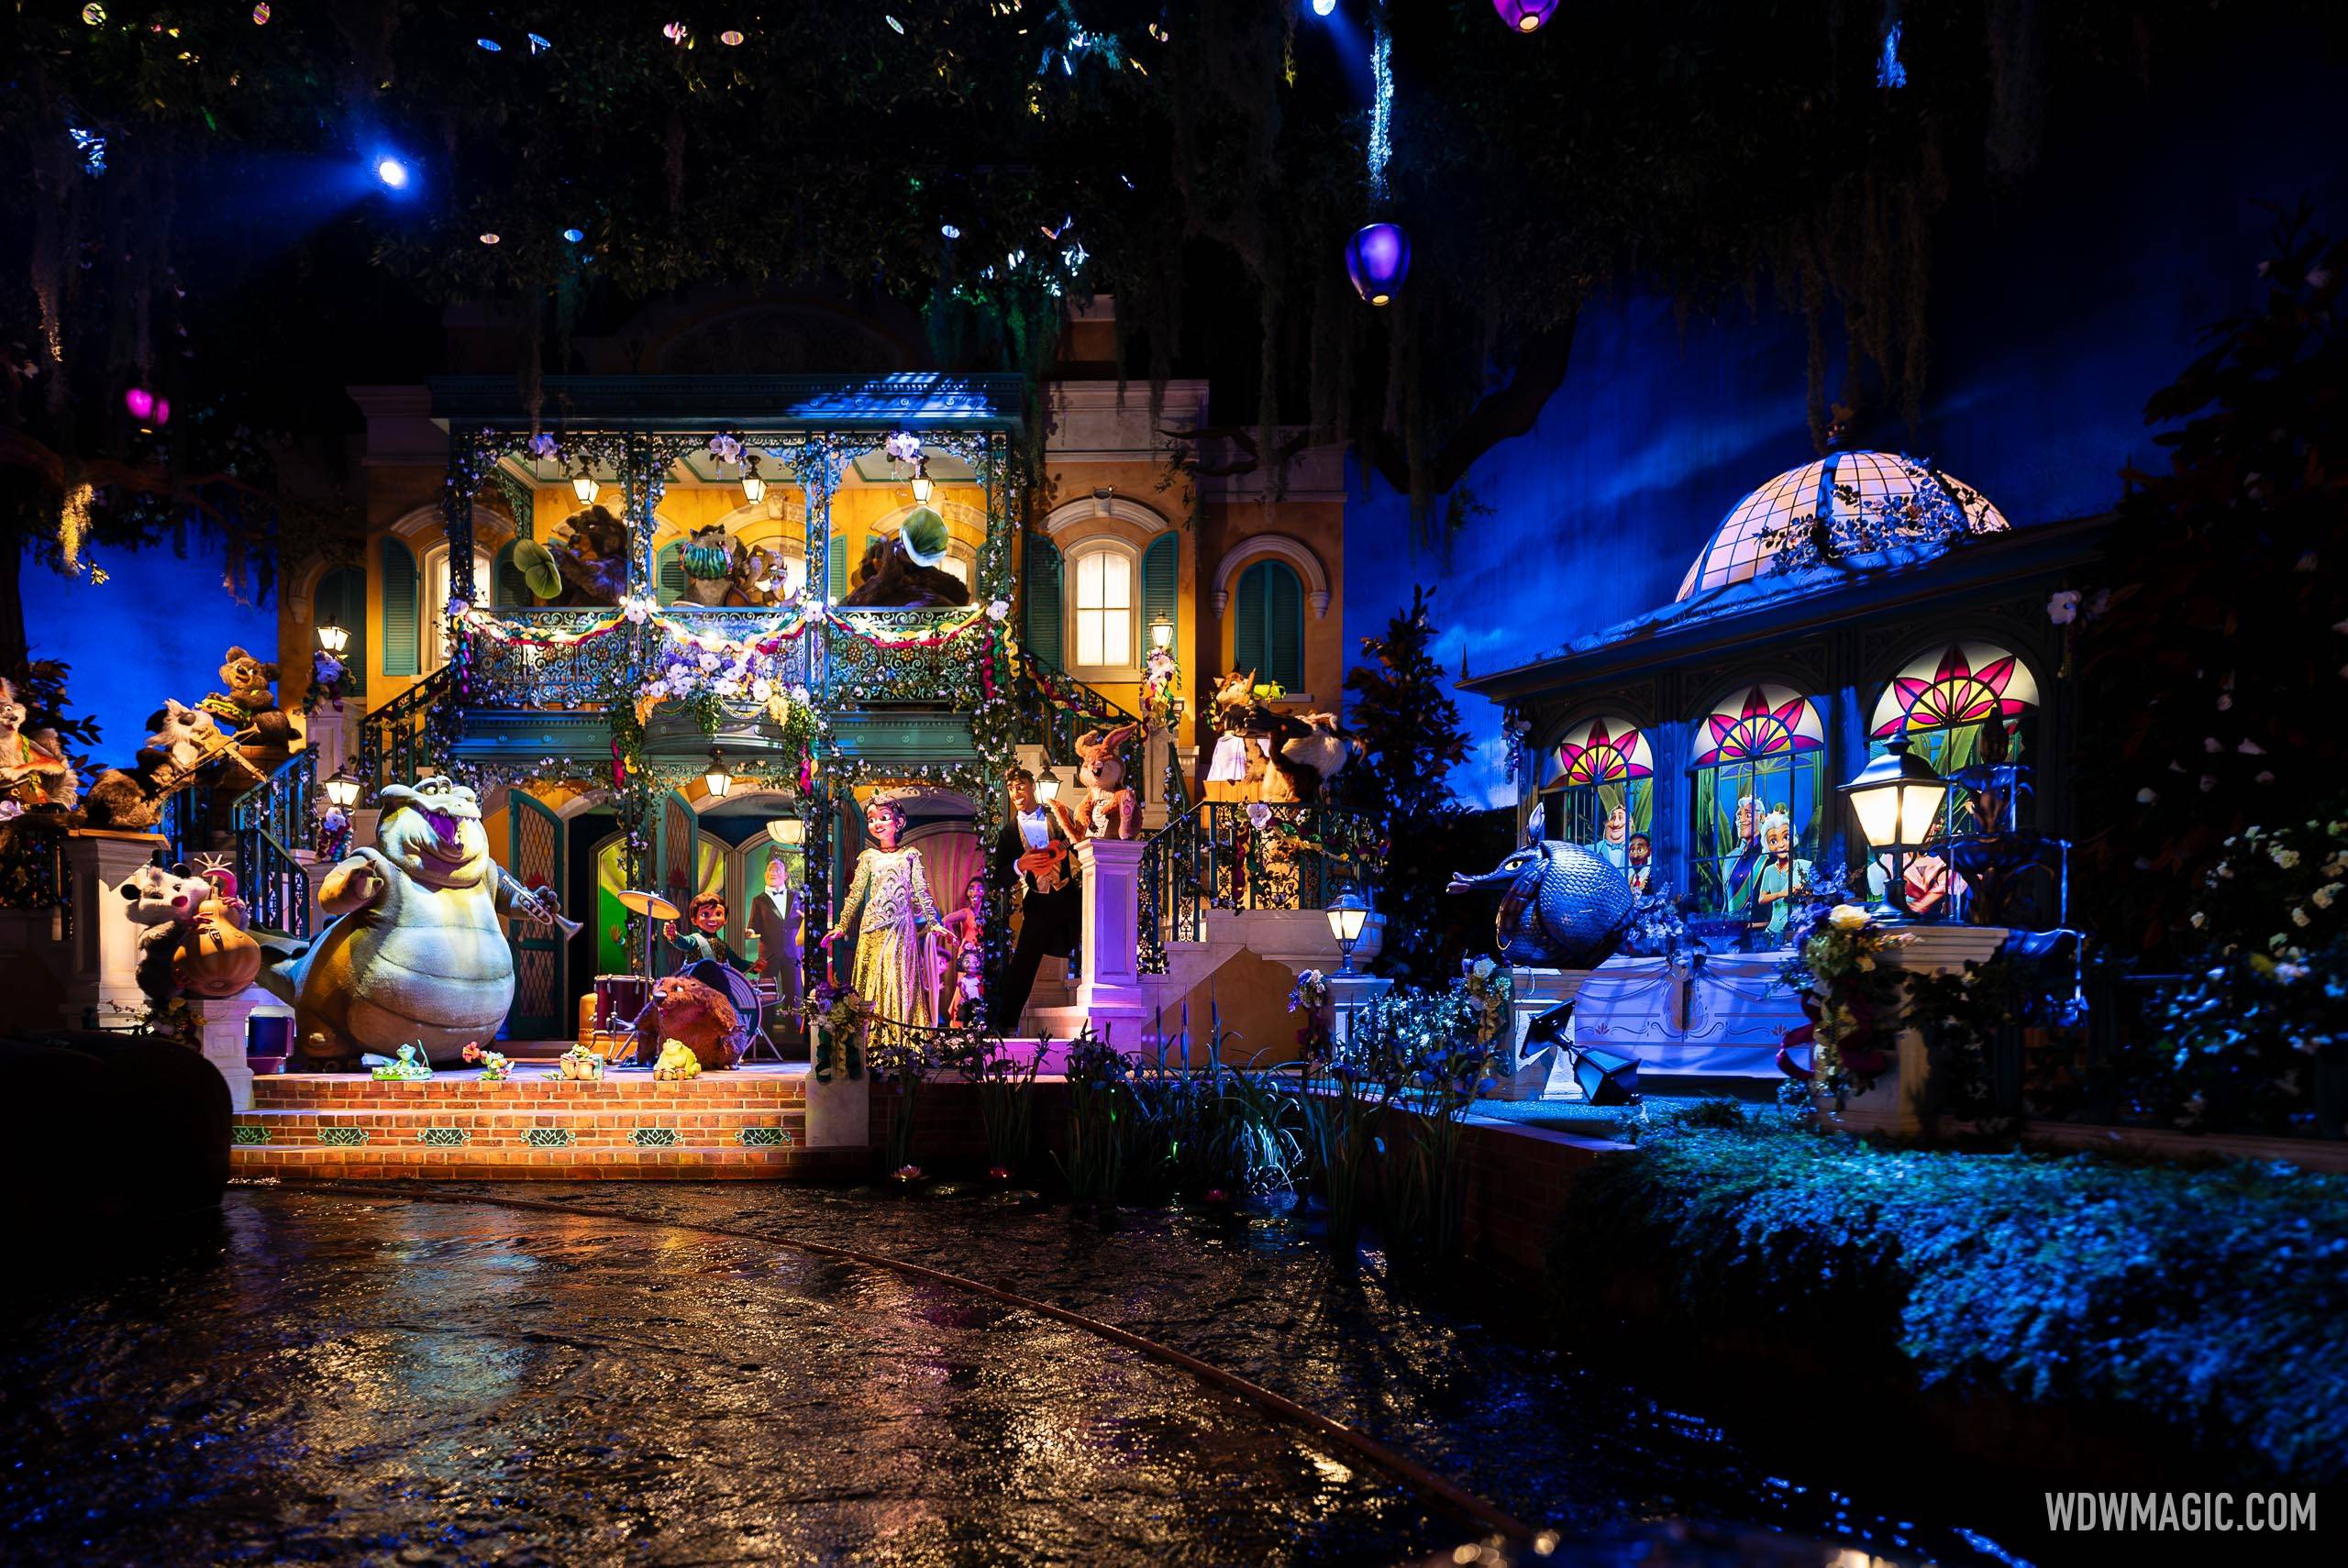 Wide view of Tiana's Party in the finale scene